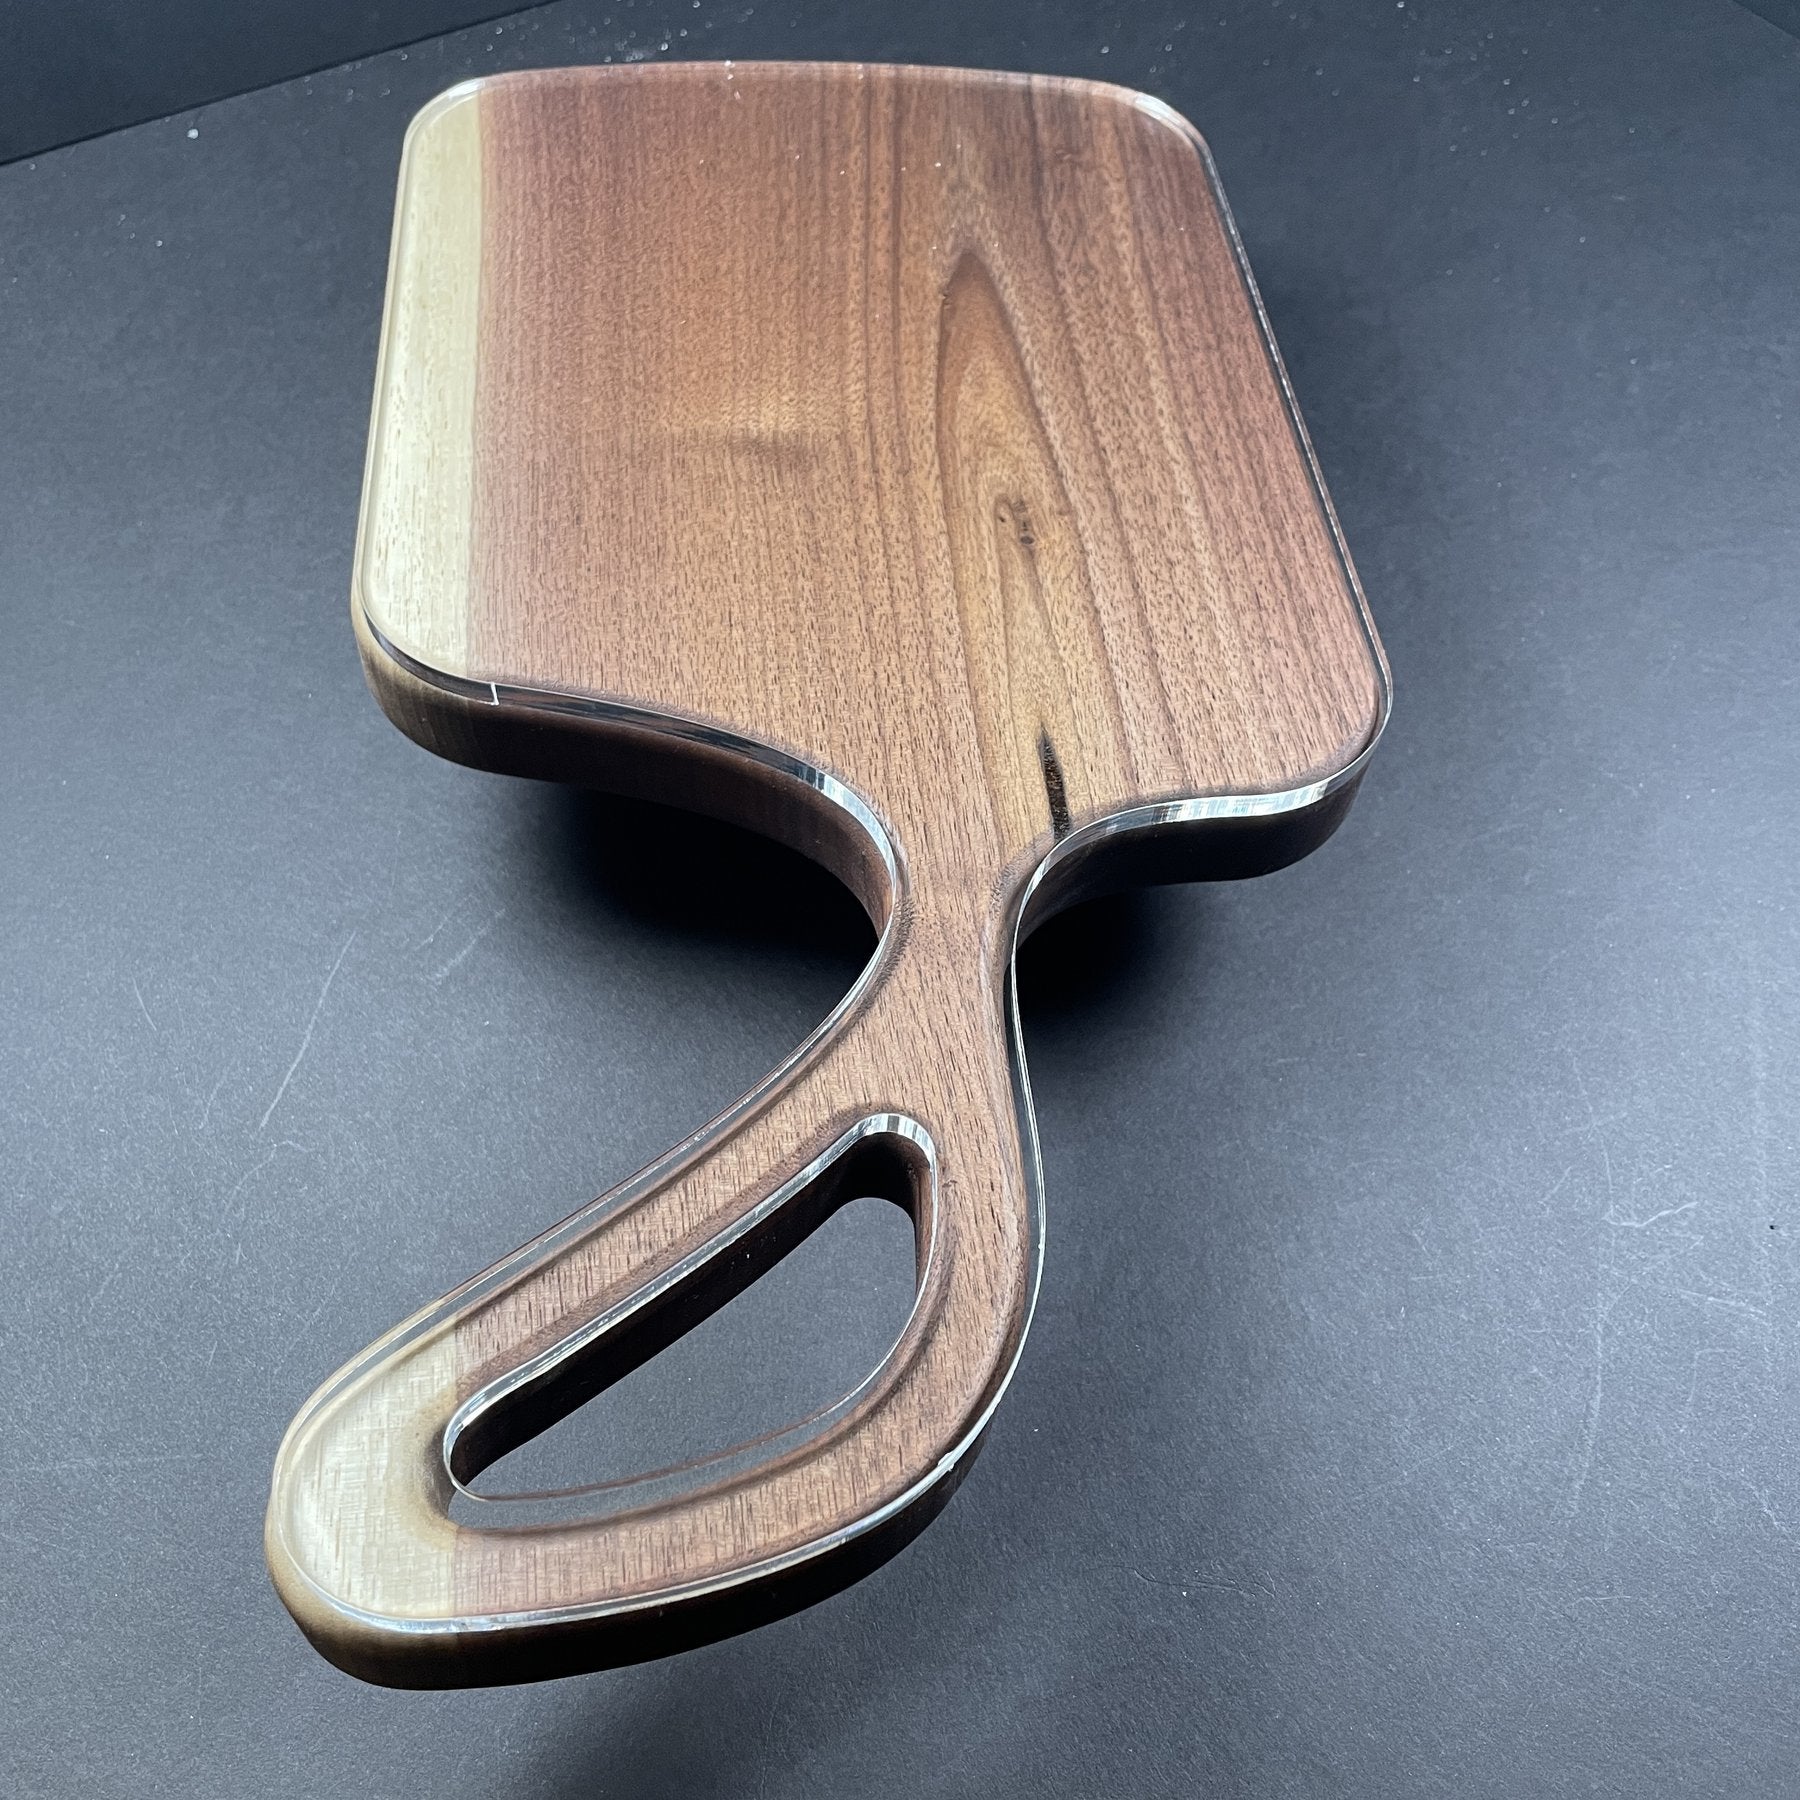 Serving Board "Oblong" Router Template